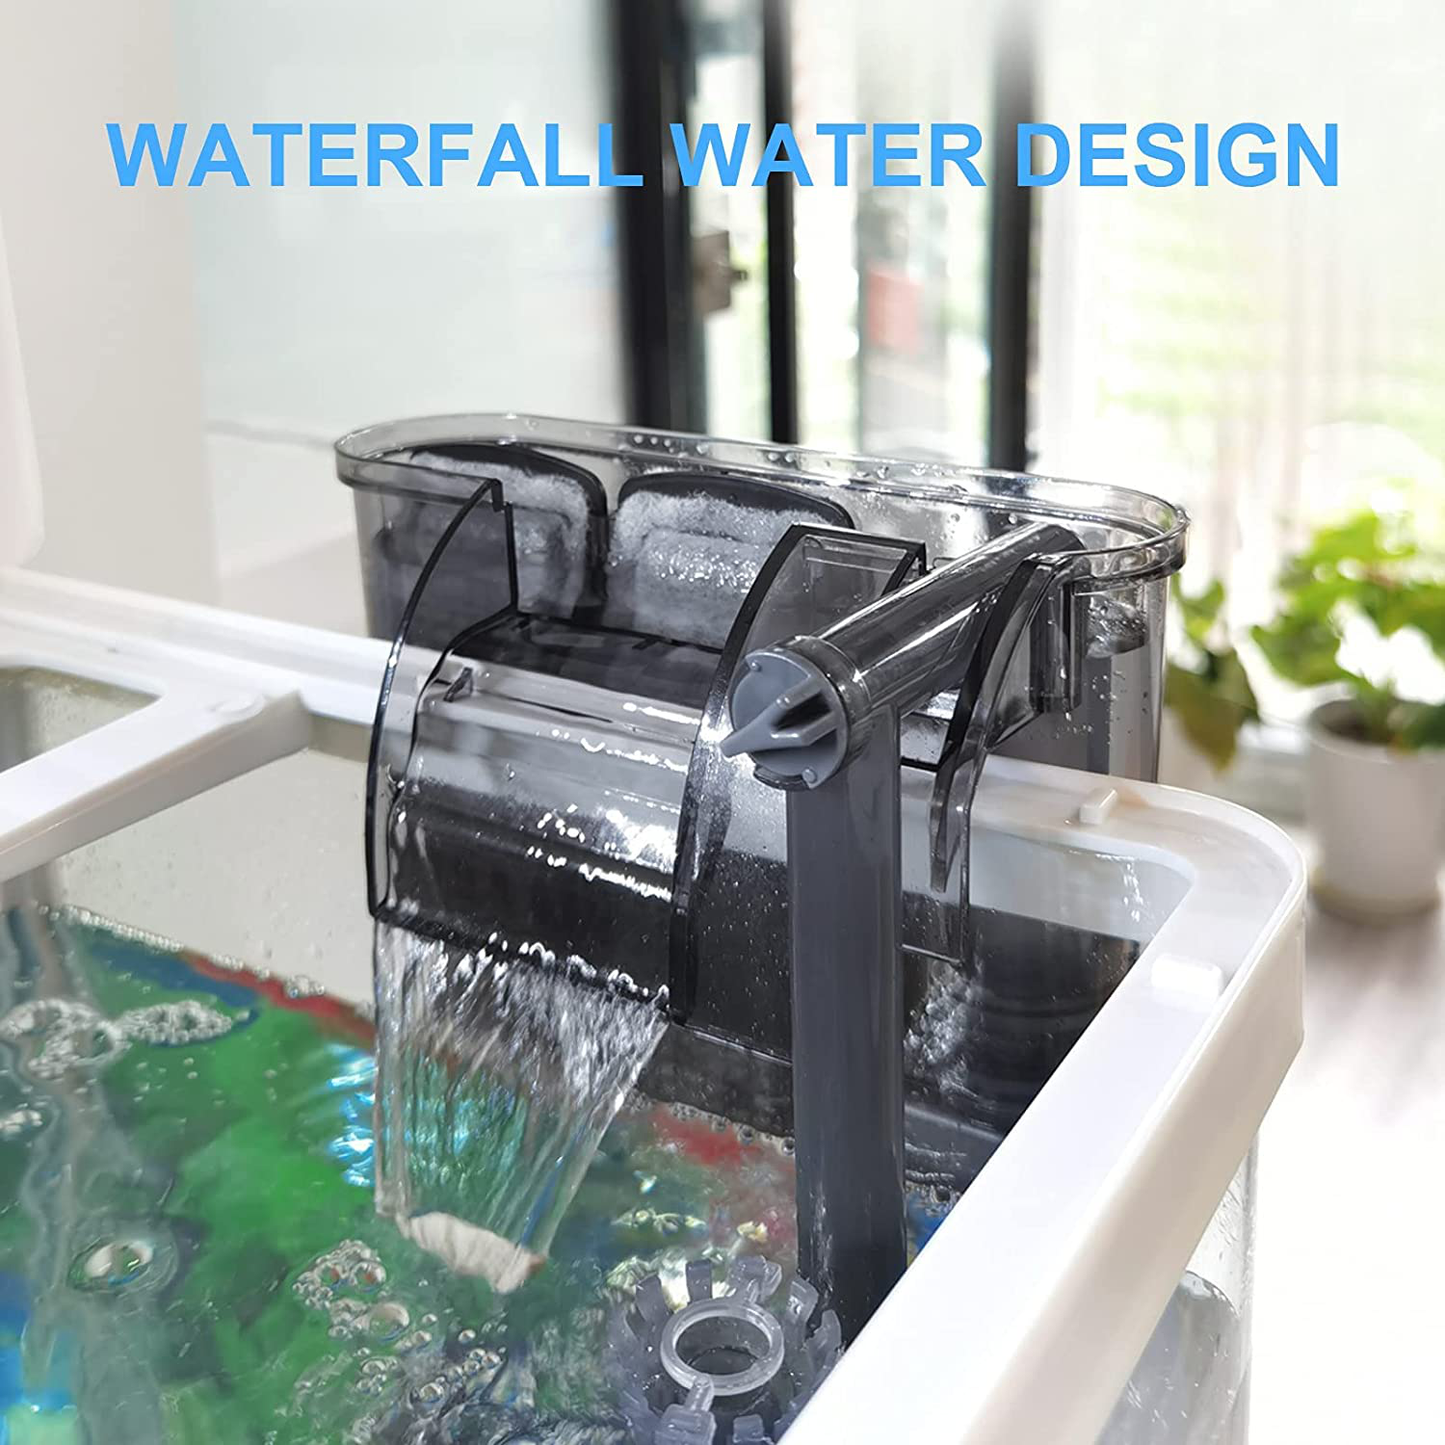 AKKEE Aquarium Filter Super Quiet：Hang on Filter for Small Fish Tank Filter Waterfall Water Ultra Silent Filter for 5 to 15 Gallons Tank